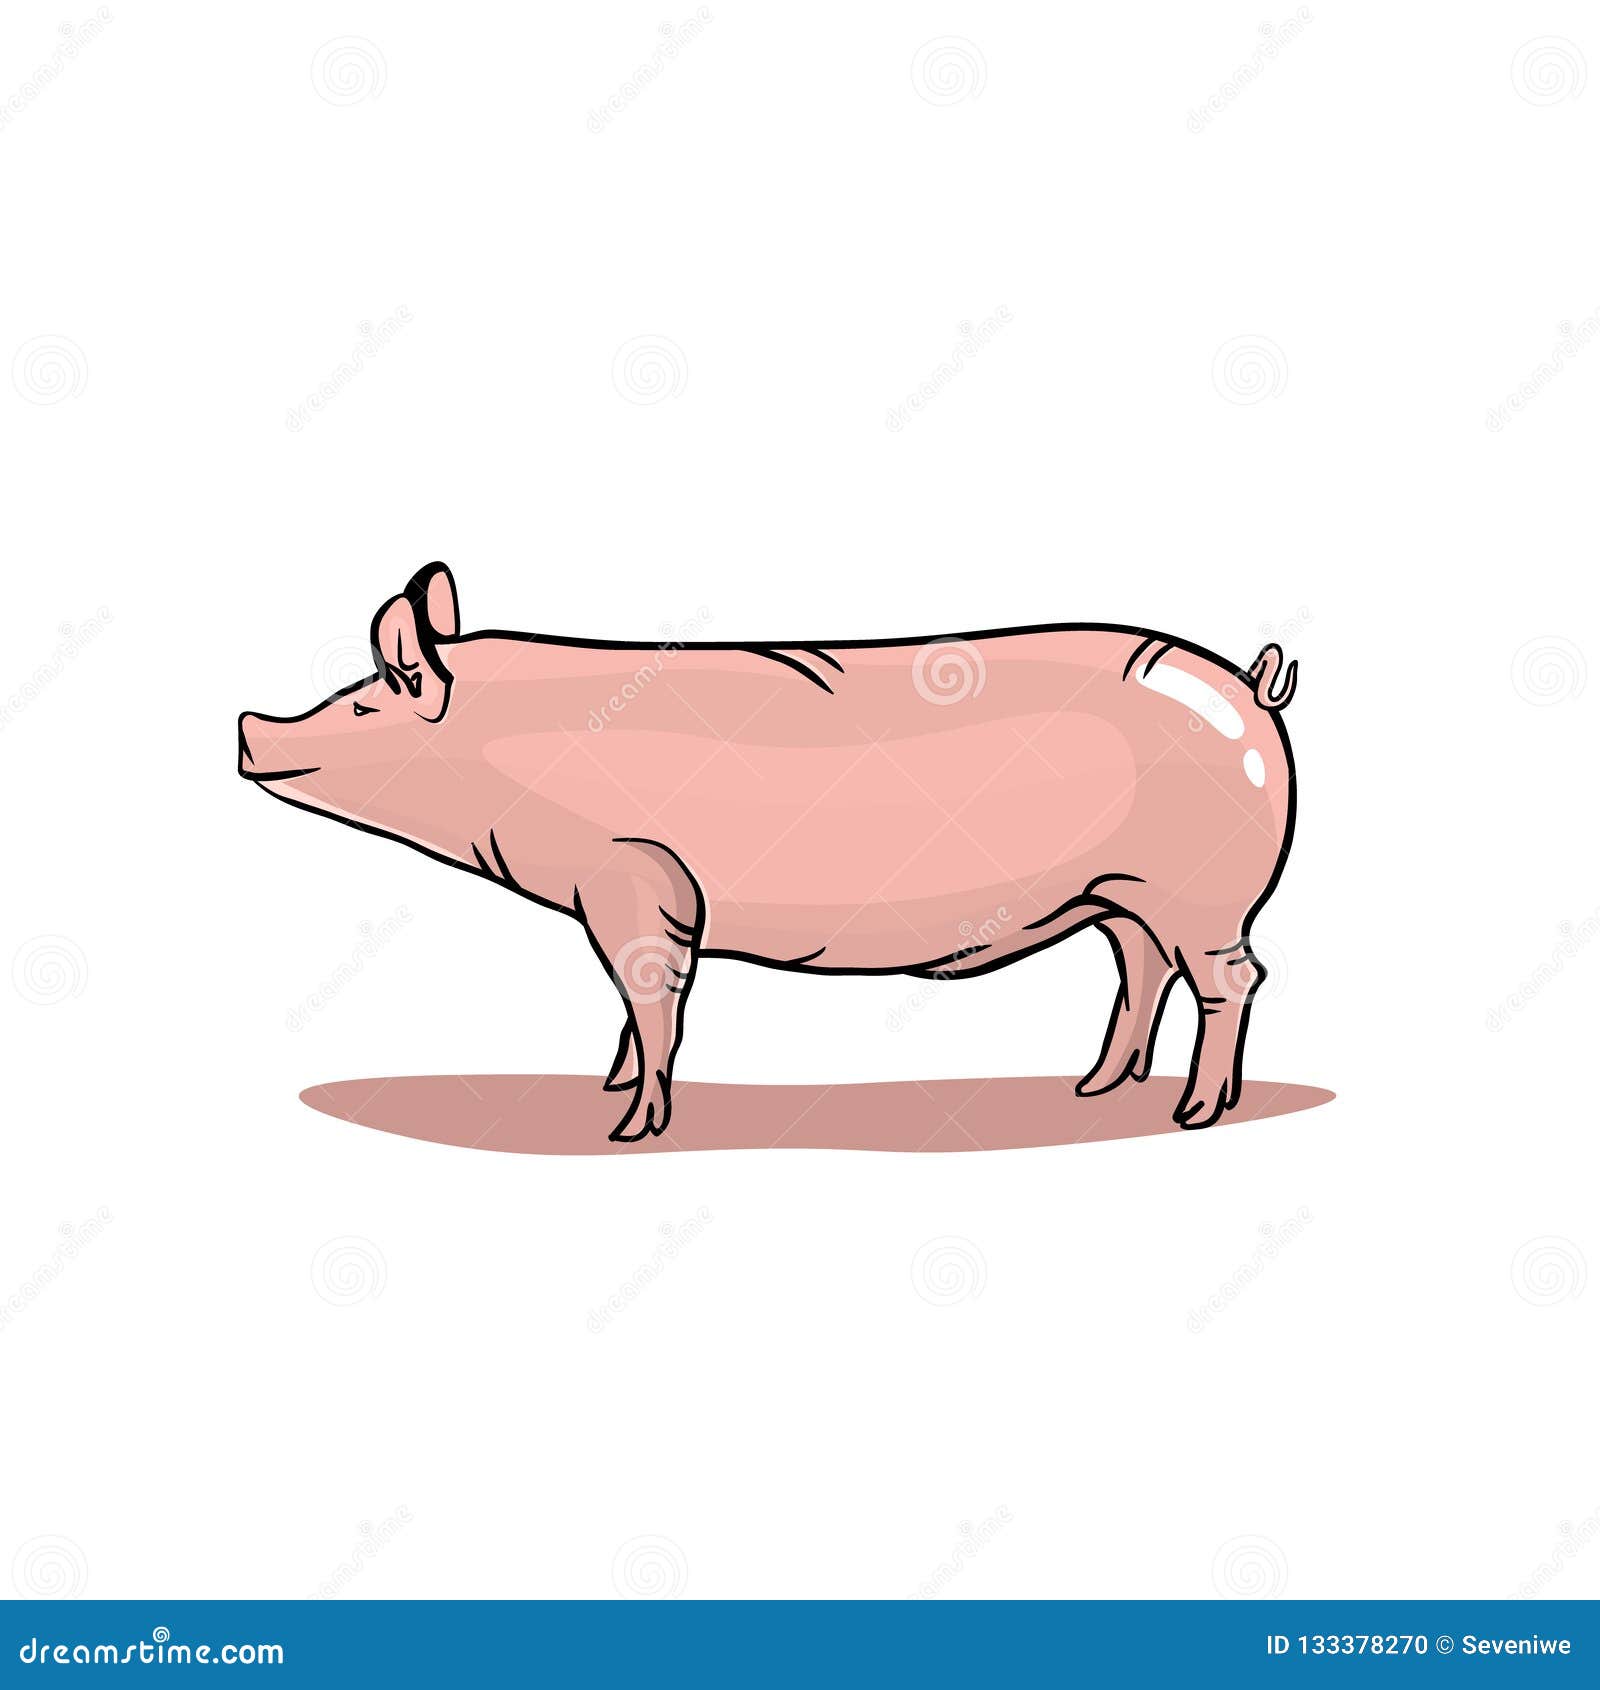 Realistic Pig Isolated On White Background Pink Pig Illustration In Realistic Style Stock Vector Illustration Of Design Isolated